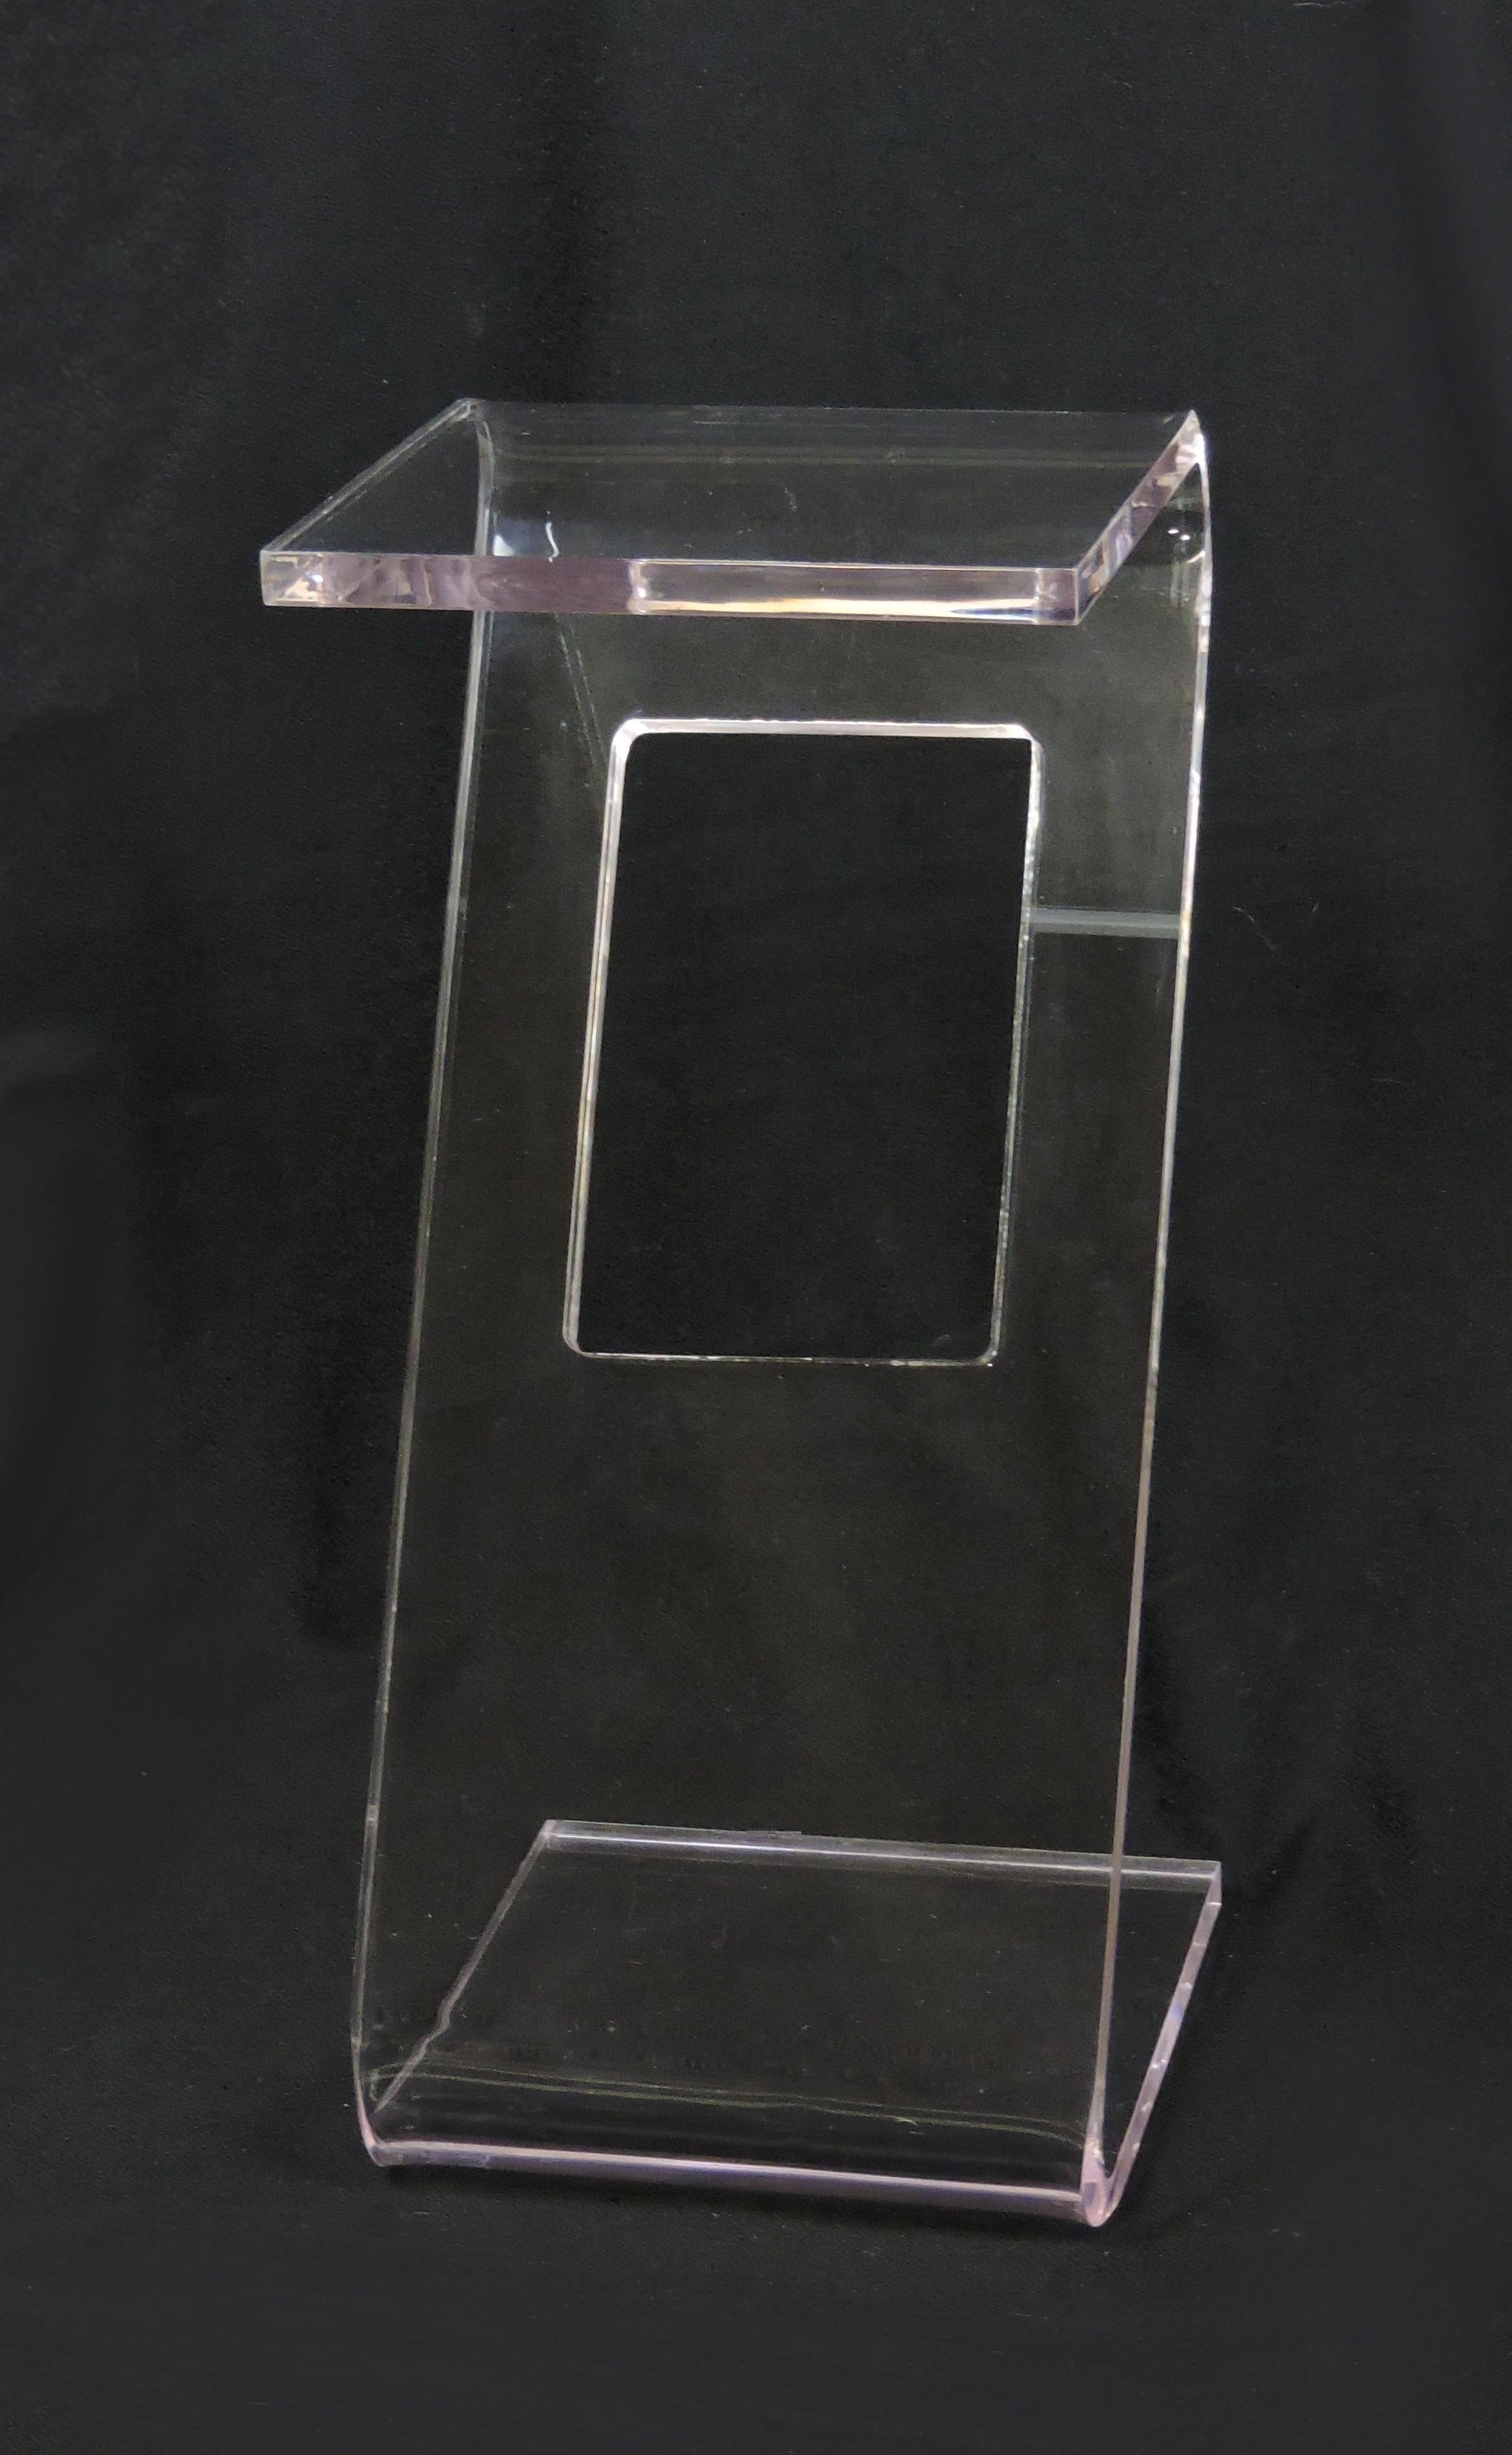 Beautiful Lucite end table. This table is made of three-quarter-inch thick clear Lucite that is bent into a Z shape and has a rectangular cutout in the center. Sturdy and well made, great for small spaces.